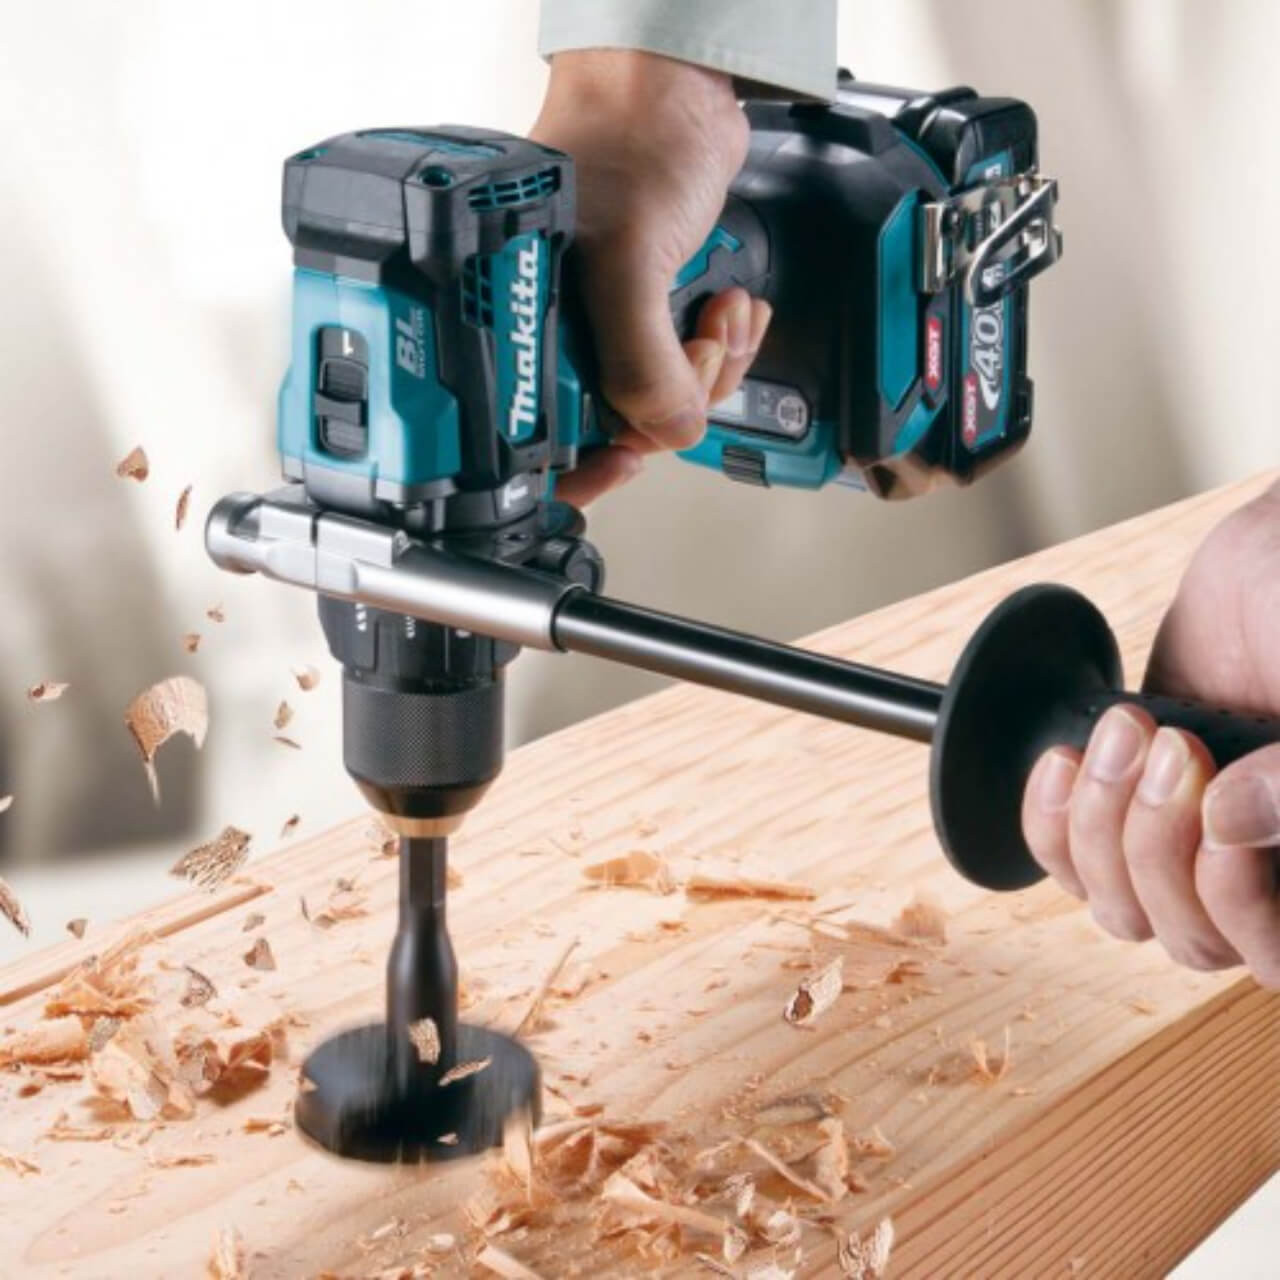 Makita 40V MAX BRUSHLESS Hammer Driver Drill - Tool Only